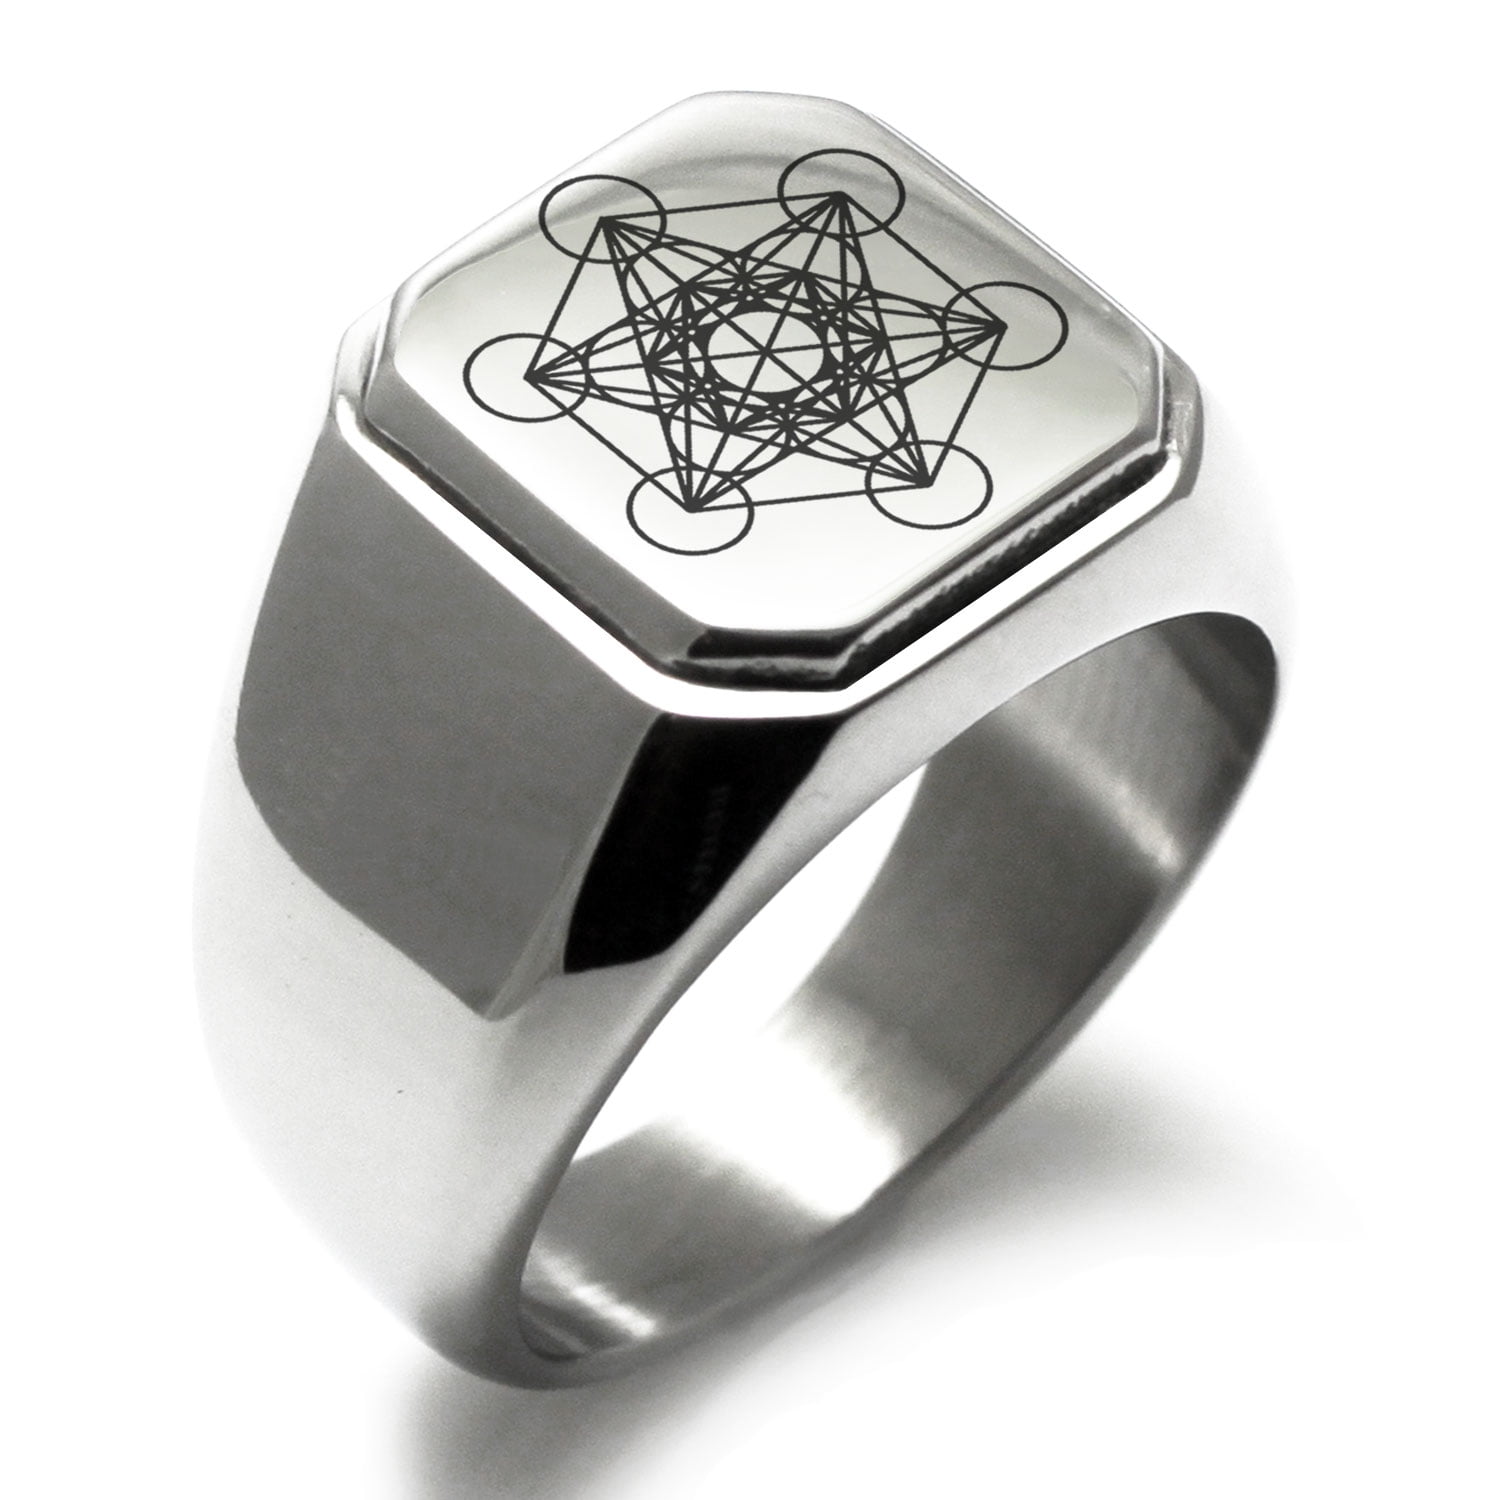 Stainless Steel Metatron’s Cube Symbol Square Flat Top Biker Style Polished Ring 